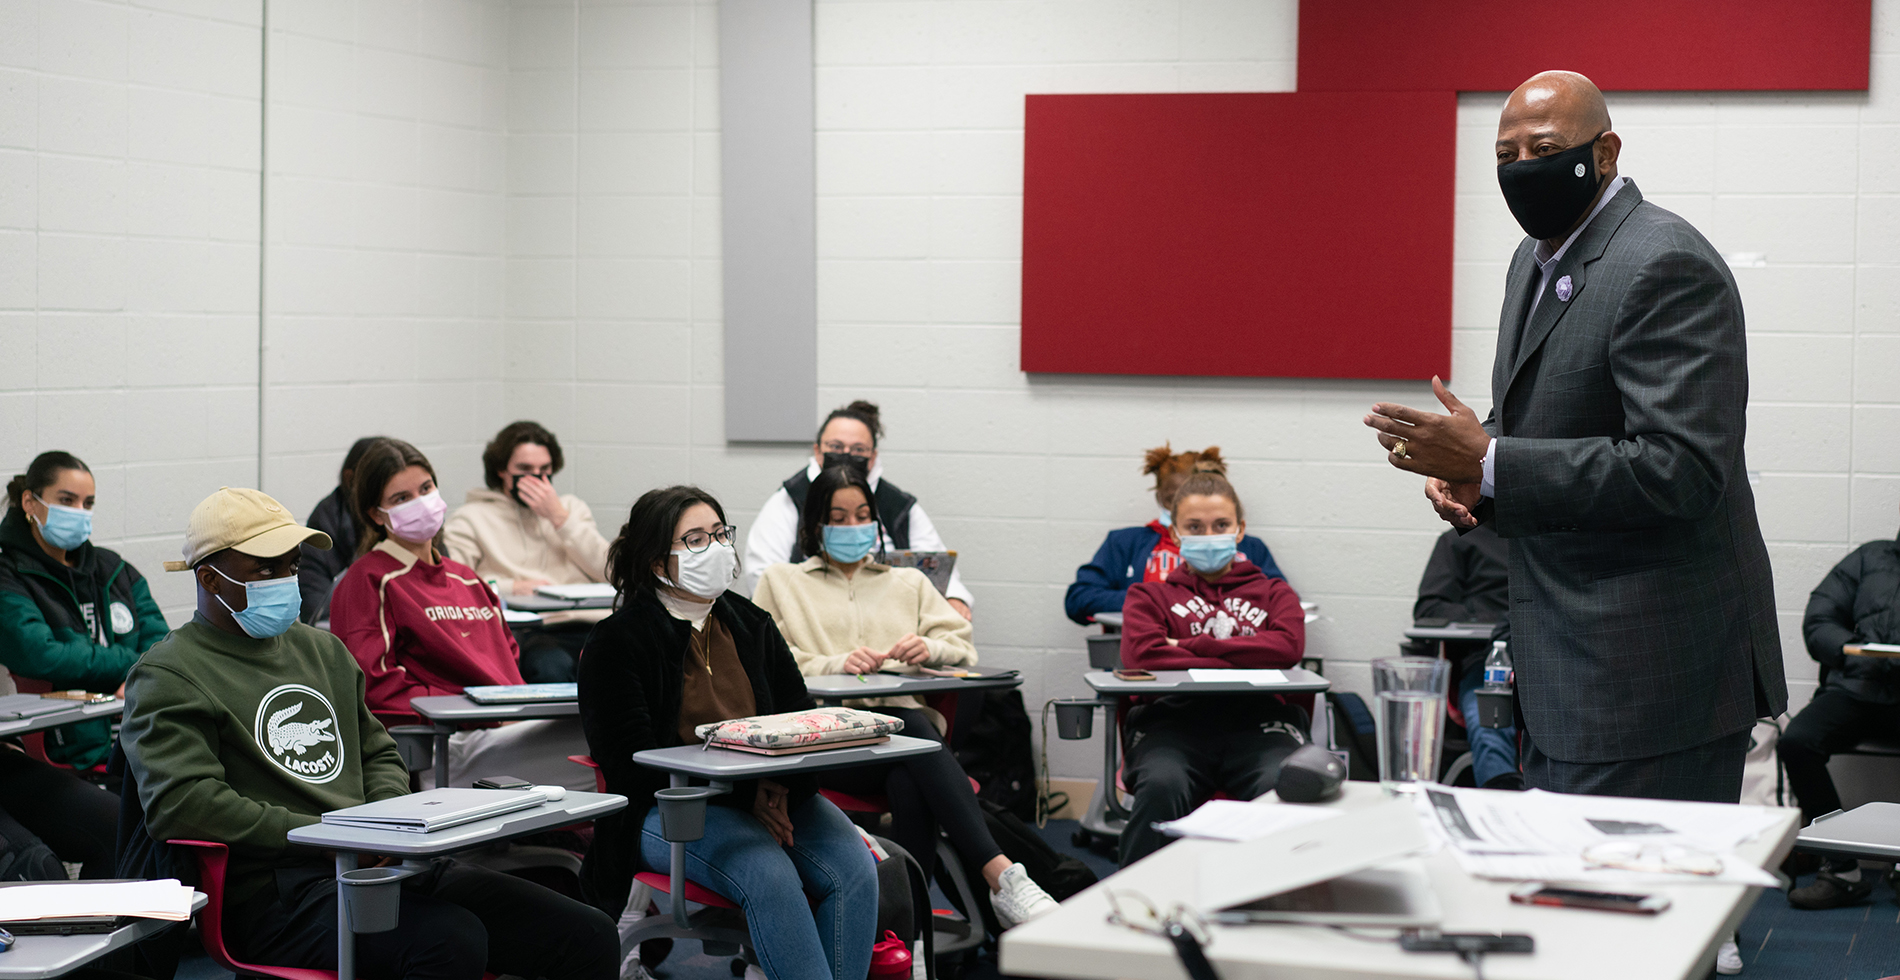 Earl Cureton, right, speaks to Fr. Patrick Kelly, S.J.'s class during the fall semester.